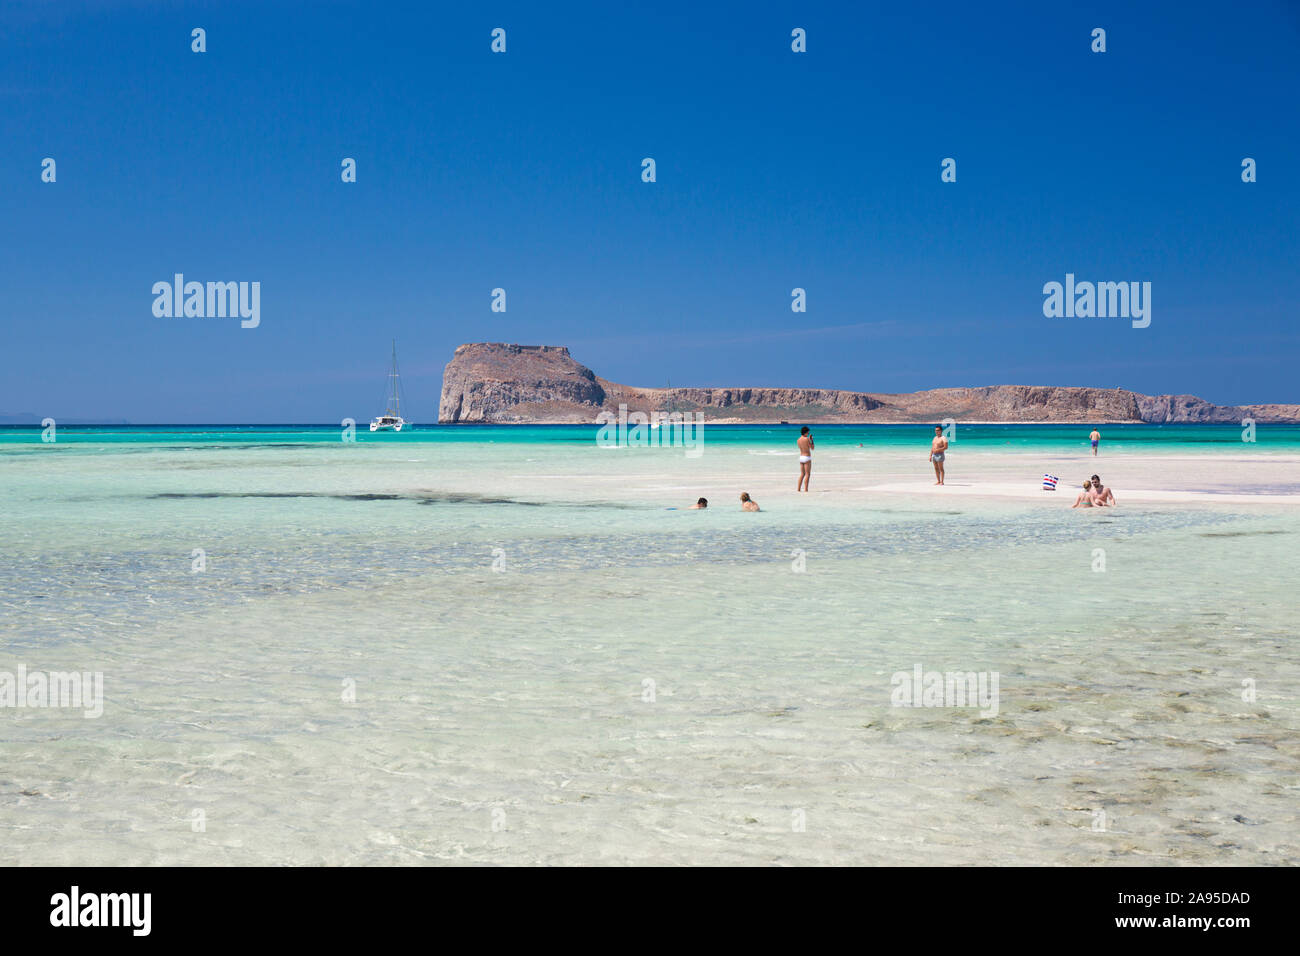 Balos, Chania, Crete, Greece. View from beach across the clear shallow waters of Gramvousa Bay to Imeri Gramvousa. Stock Photo